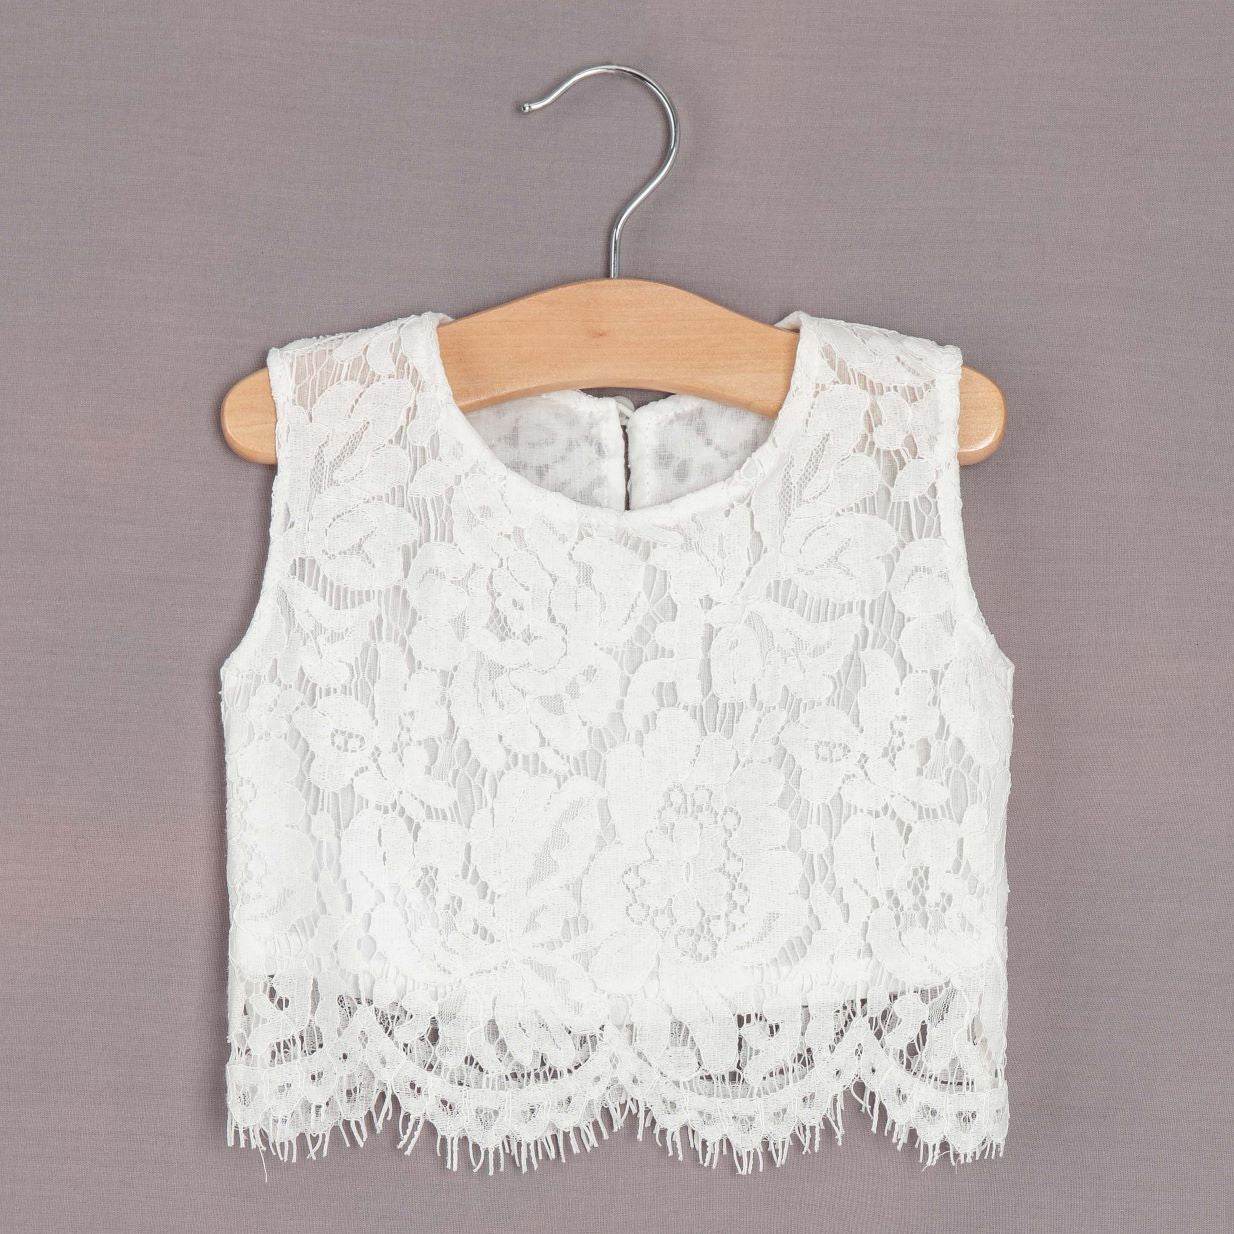 Girls Lace Top - Sleeveless or 3/4 Sleeve